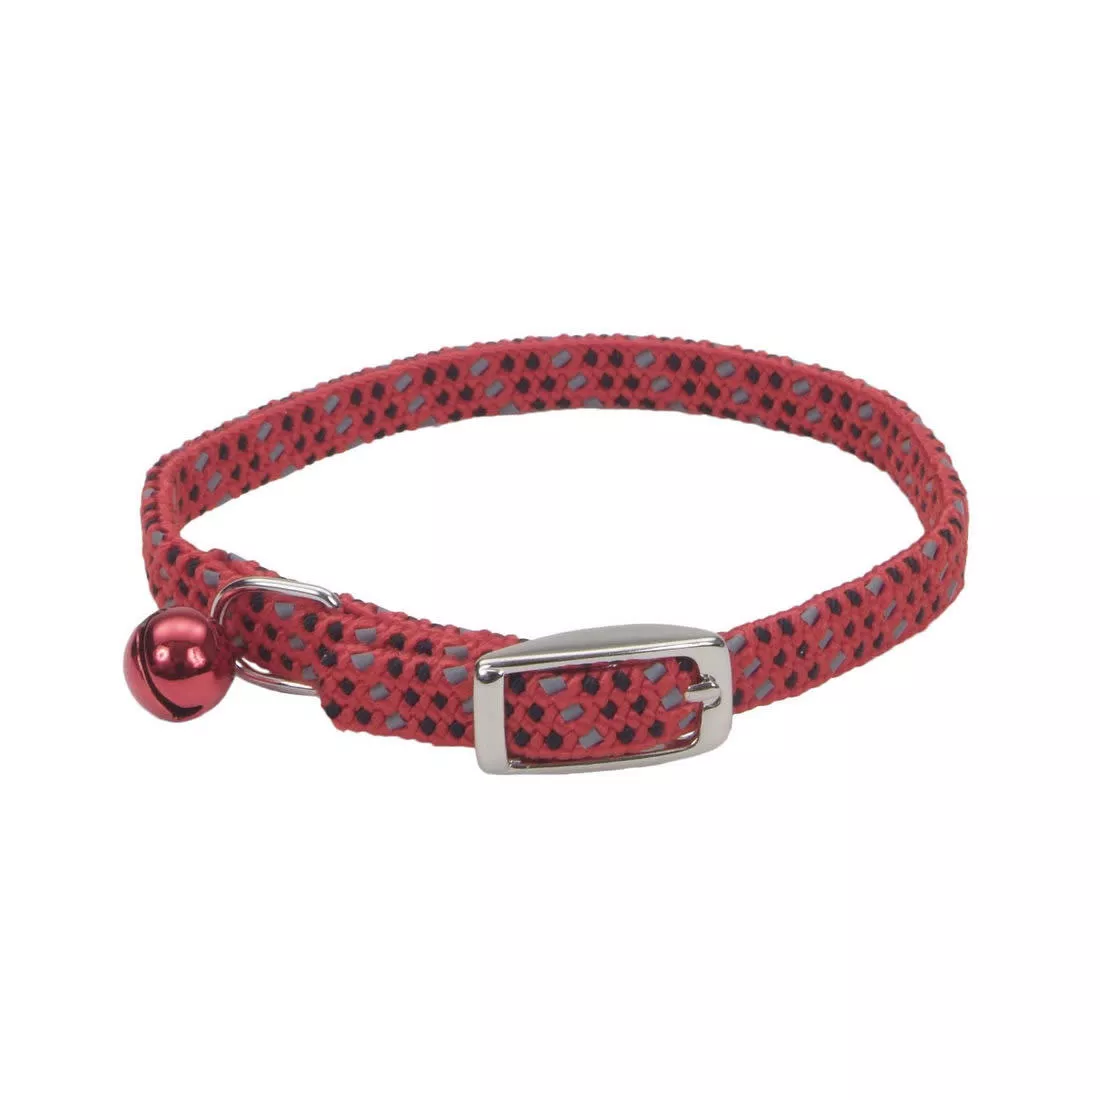 Li'l Pals® by Coastal® Elasticized Safety Kitten Collar with Reflective Threads